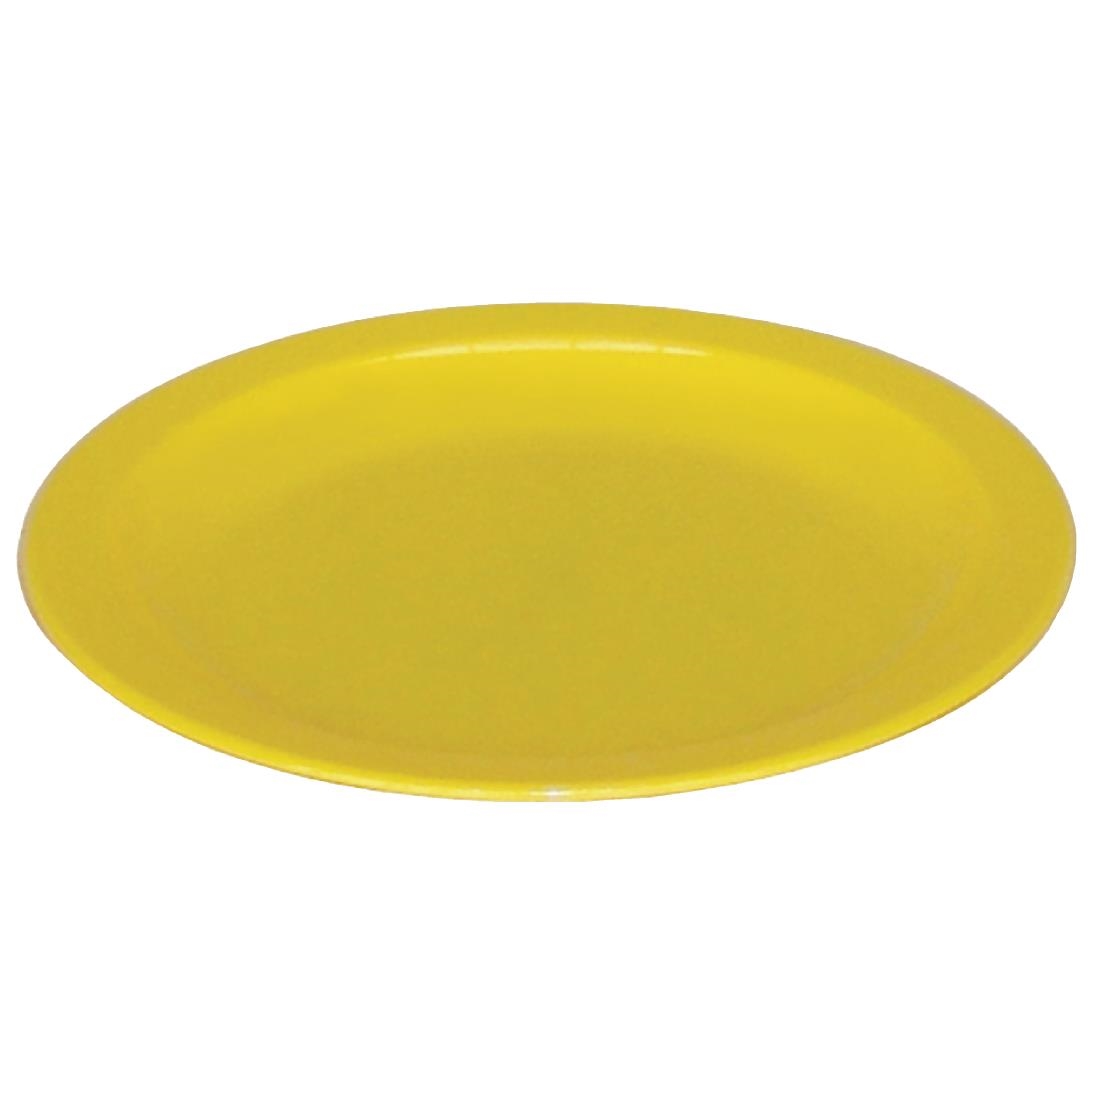 Olympia Kristallon Polycarbonate Plates Yellow 230mm (Pack of 12)